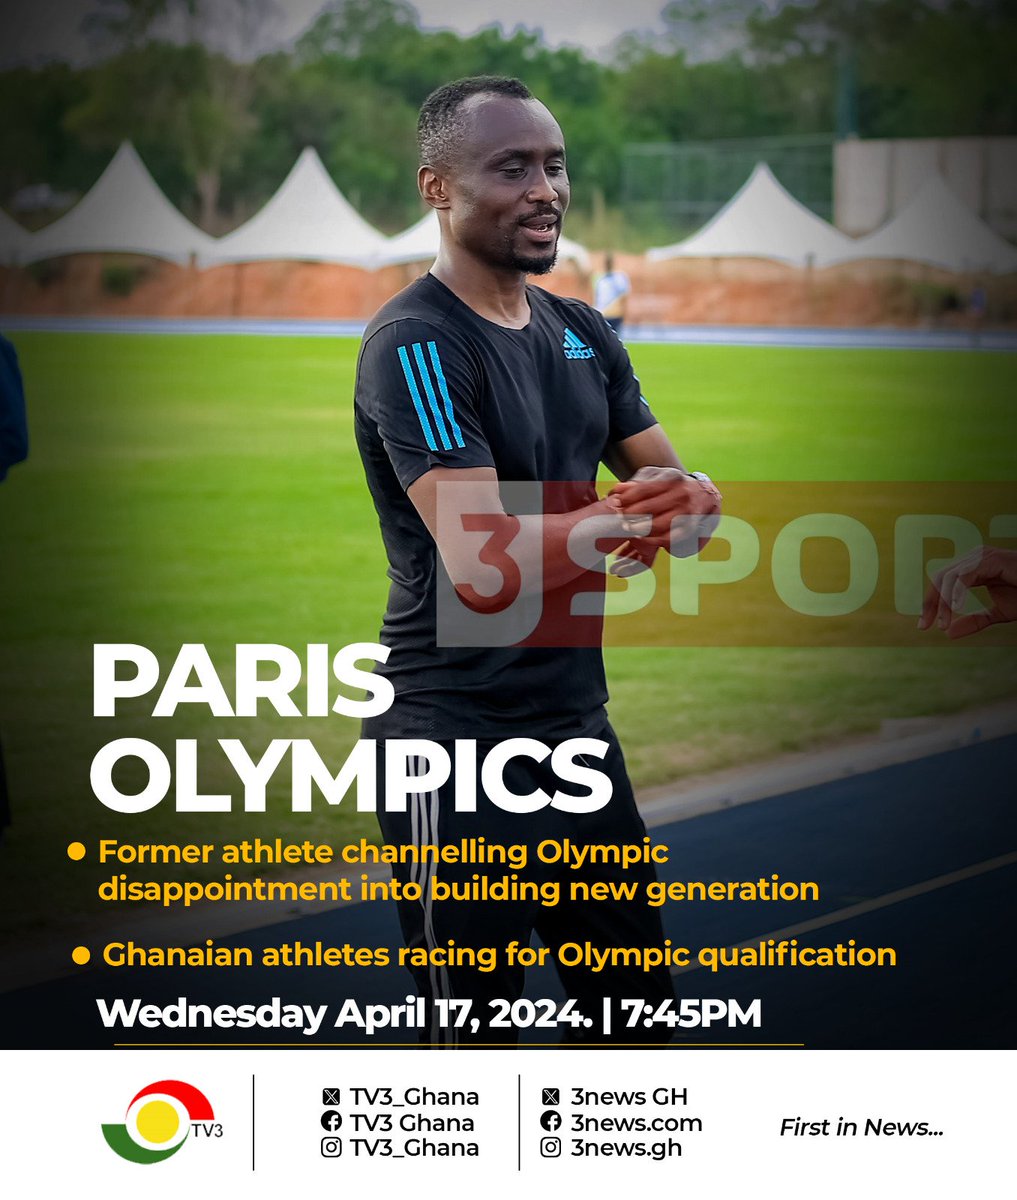 We have two specials on @tv3_ghana tonight! Join us at 7:45pm as we build up to #Paris2024 with 100 days to go #3SportsGH